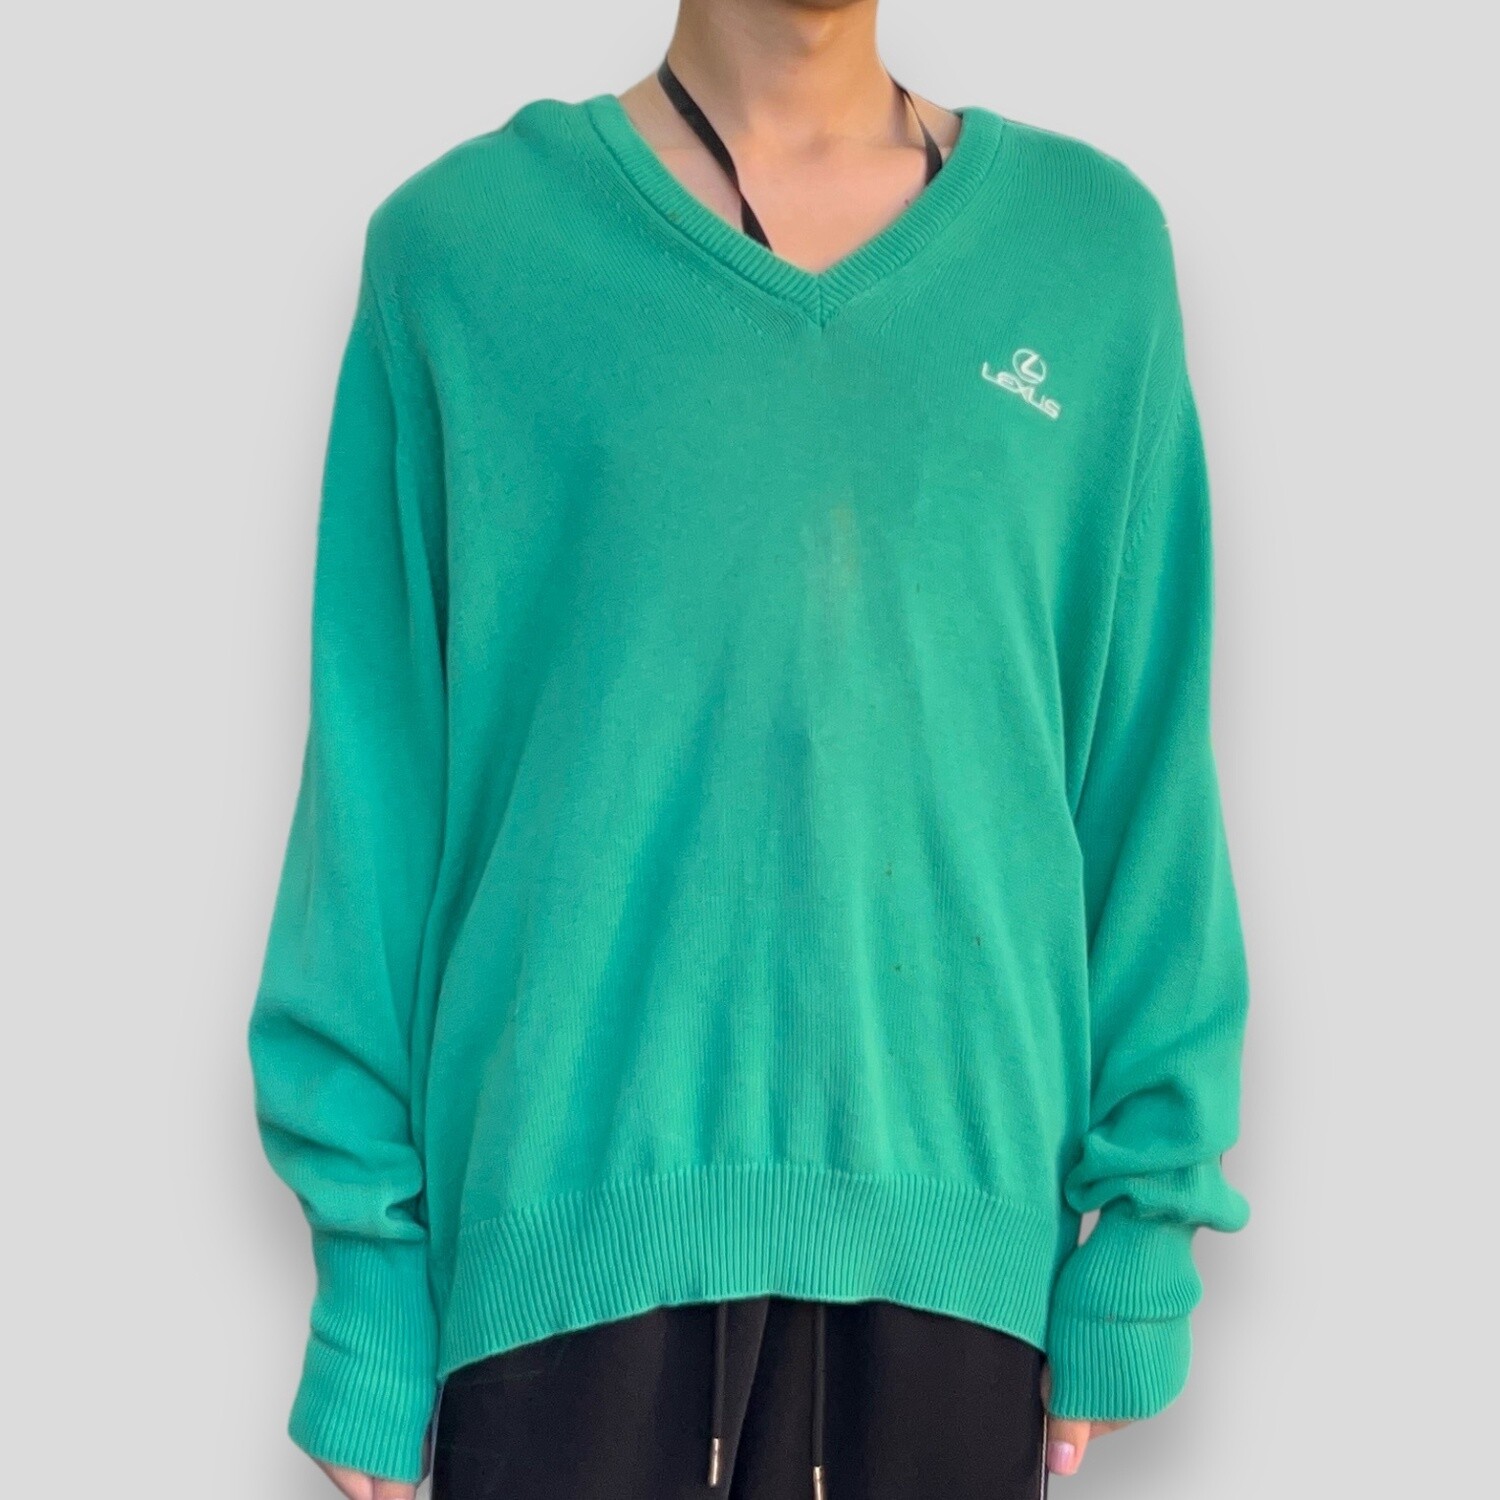 Vintage Lexus Sweater, Size: XL, Color: Green, Style: Sweater